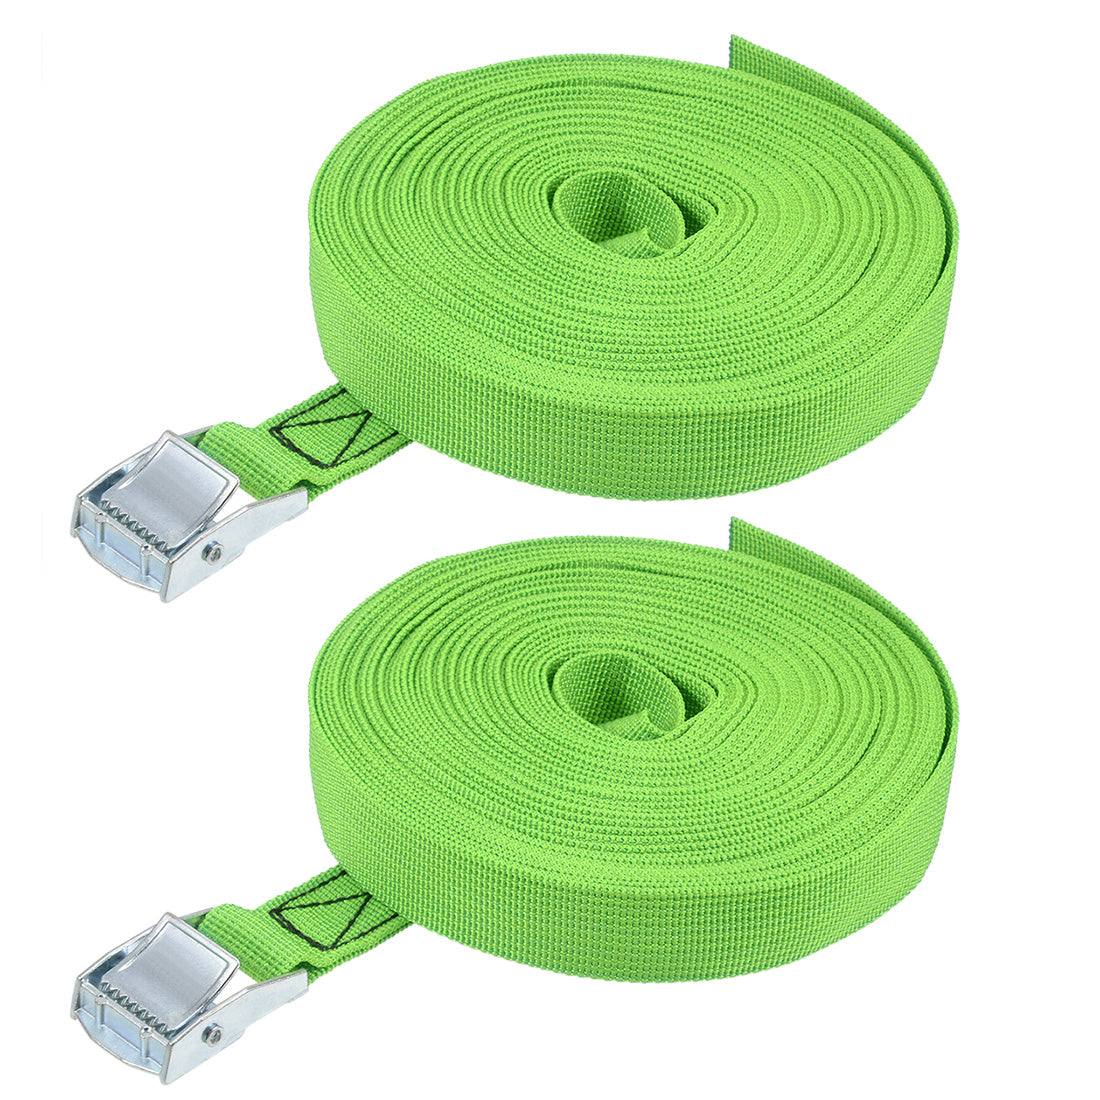 uxcell Uxcell Lashing Strap 1" x 39' Cargo Tie Down Straps with Cam Lock Buckle Up to 551lbs Green 2pcs